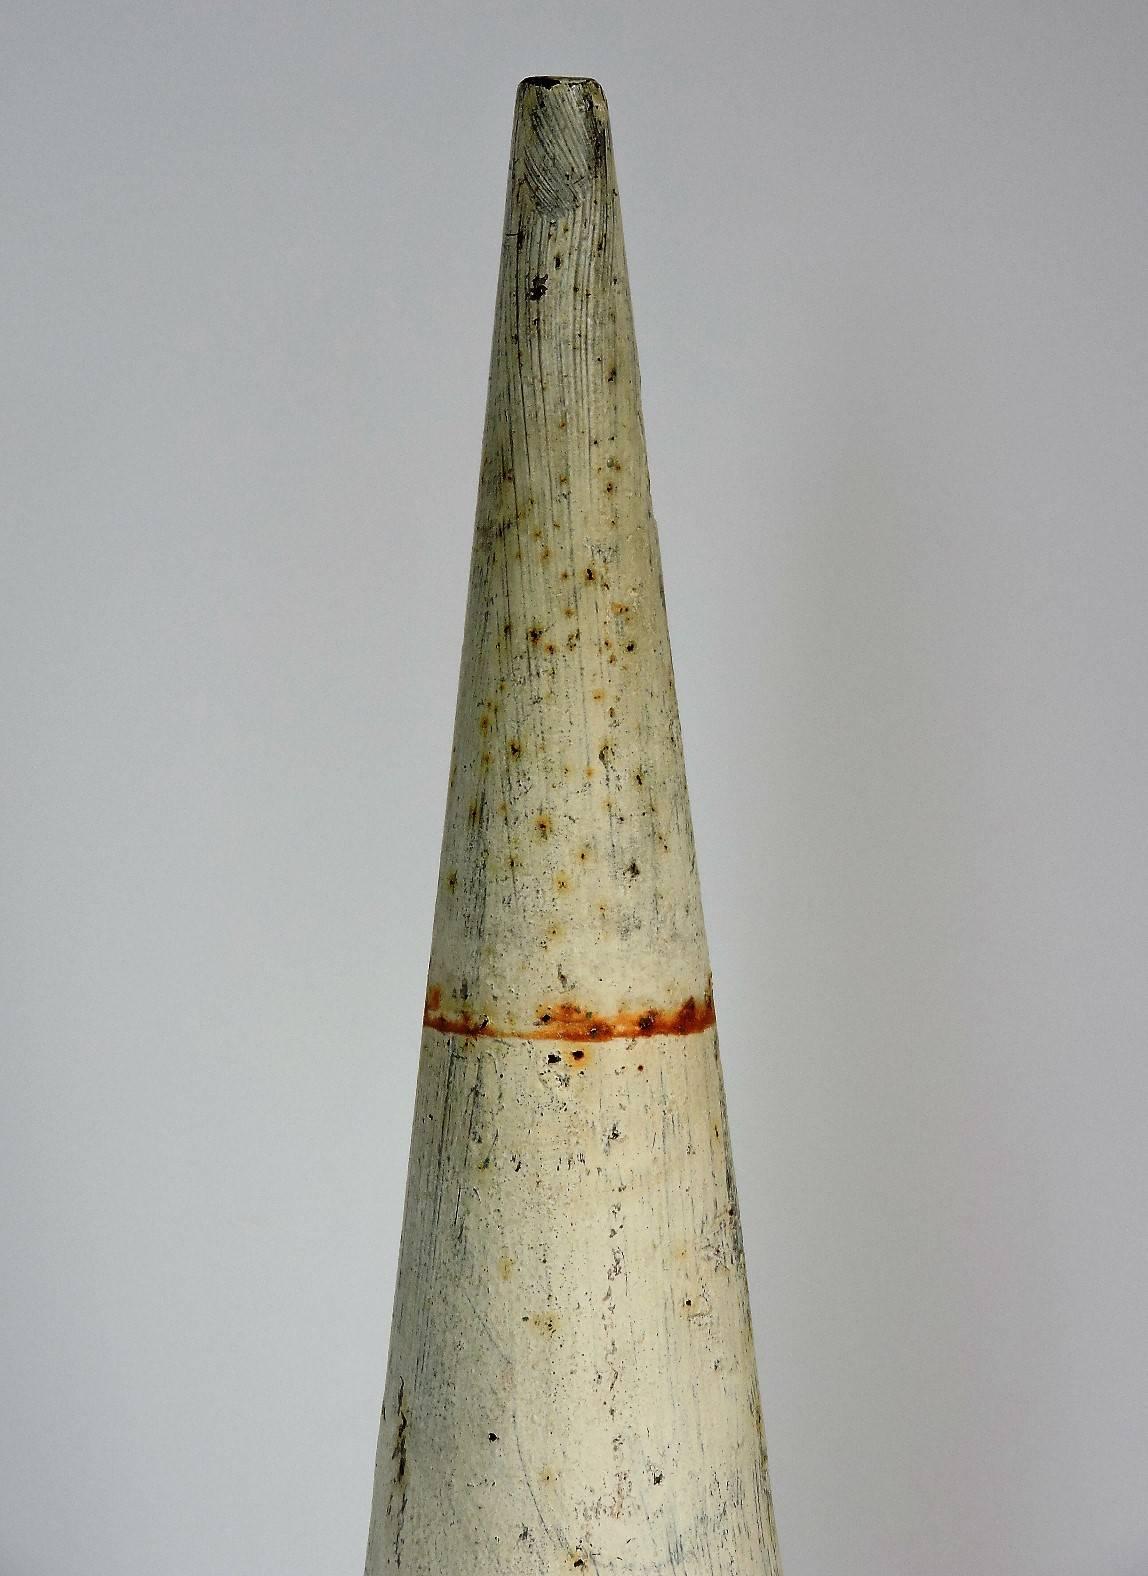 Antique Industrial blacksmith metalworker sculptor tall cone form steel mandrel in old worn white painted surface, circa 1900.